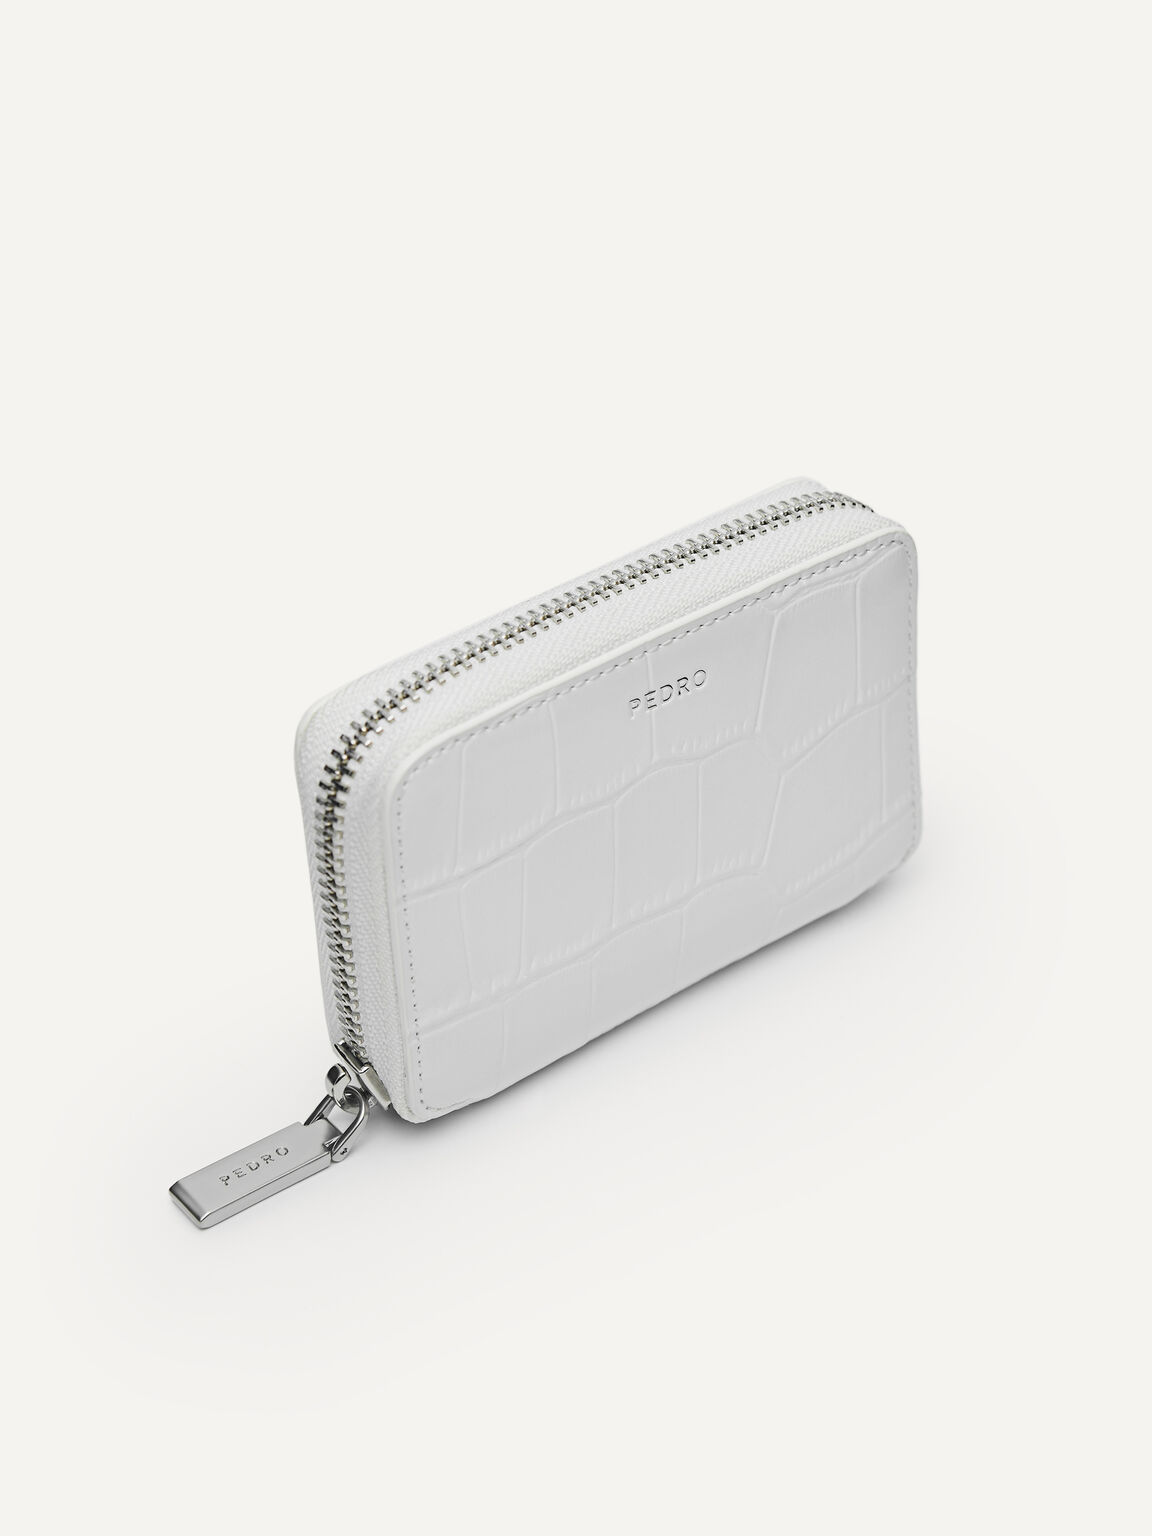 Leather Croc-Effect Pouch, White